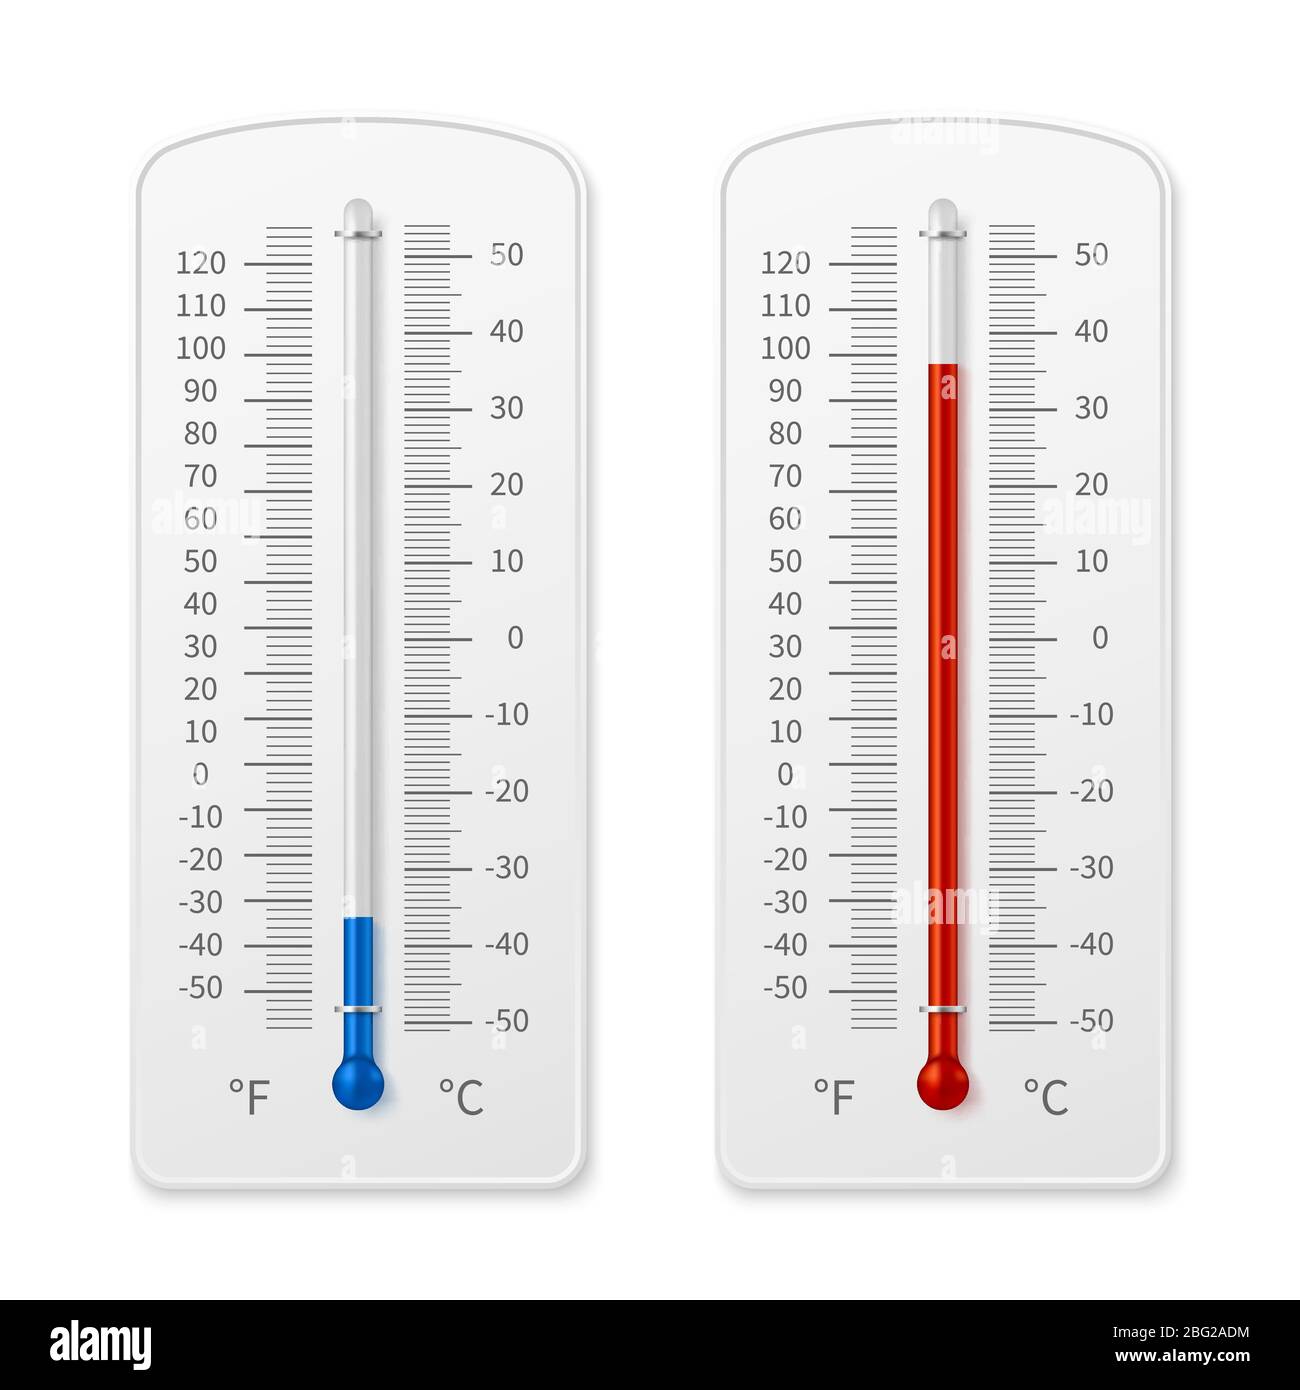 https://c8.alamy.com/comp/2BG2ADM/meteorology-indoor-thermometer-realistic-vector-illustration-isolated-temperature-scale-instrument-thermometer-for-weather-2BG2ADM.jpg